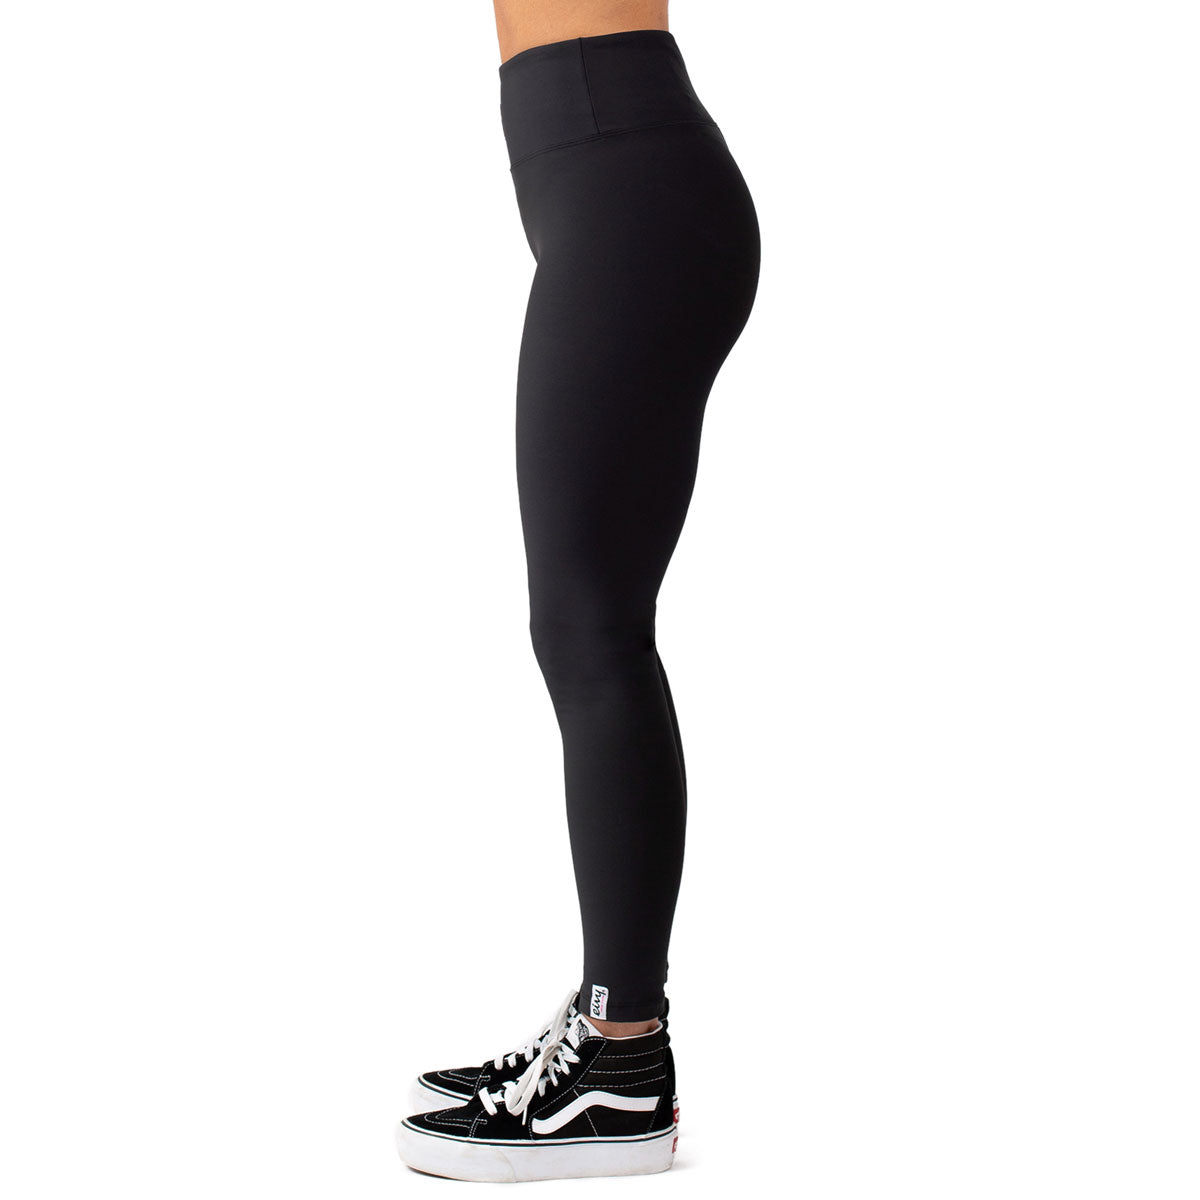 Eivy Icecold Tights Snowboard Base Layer - Team Black image 3